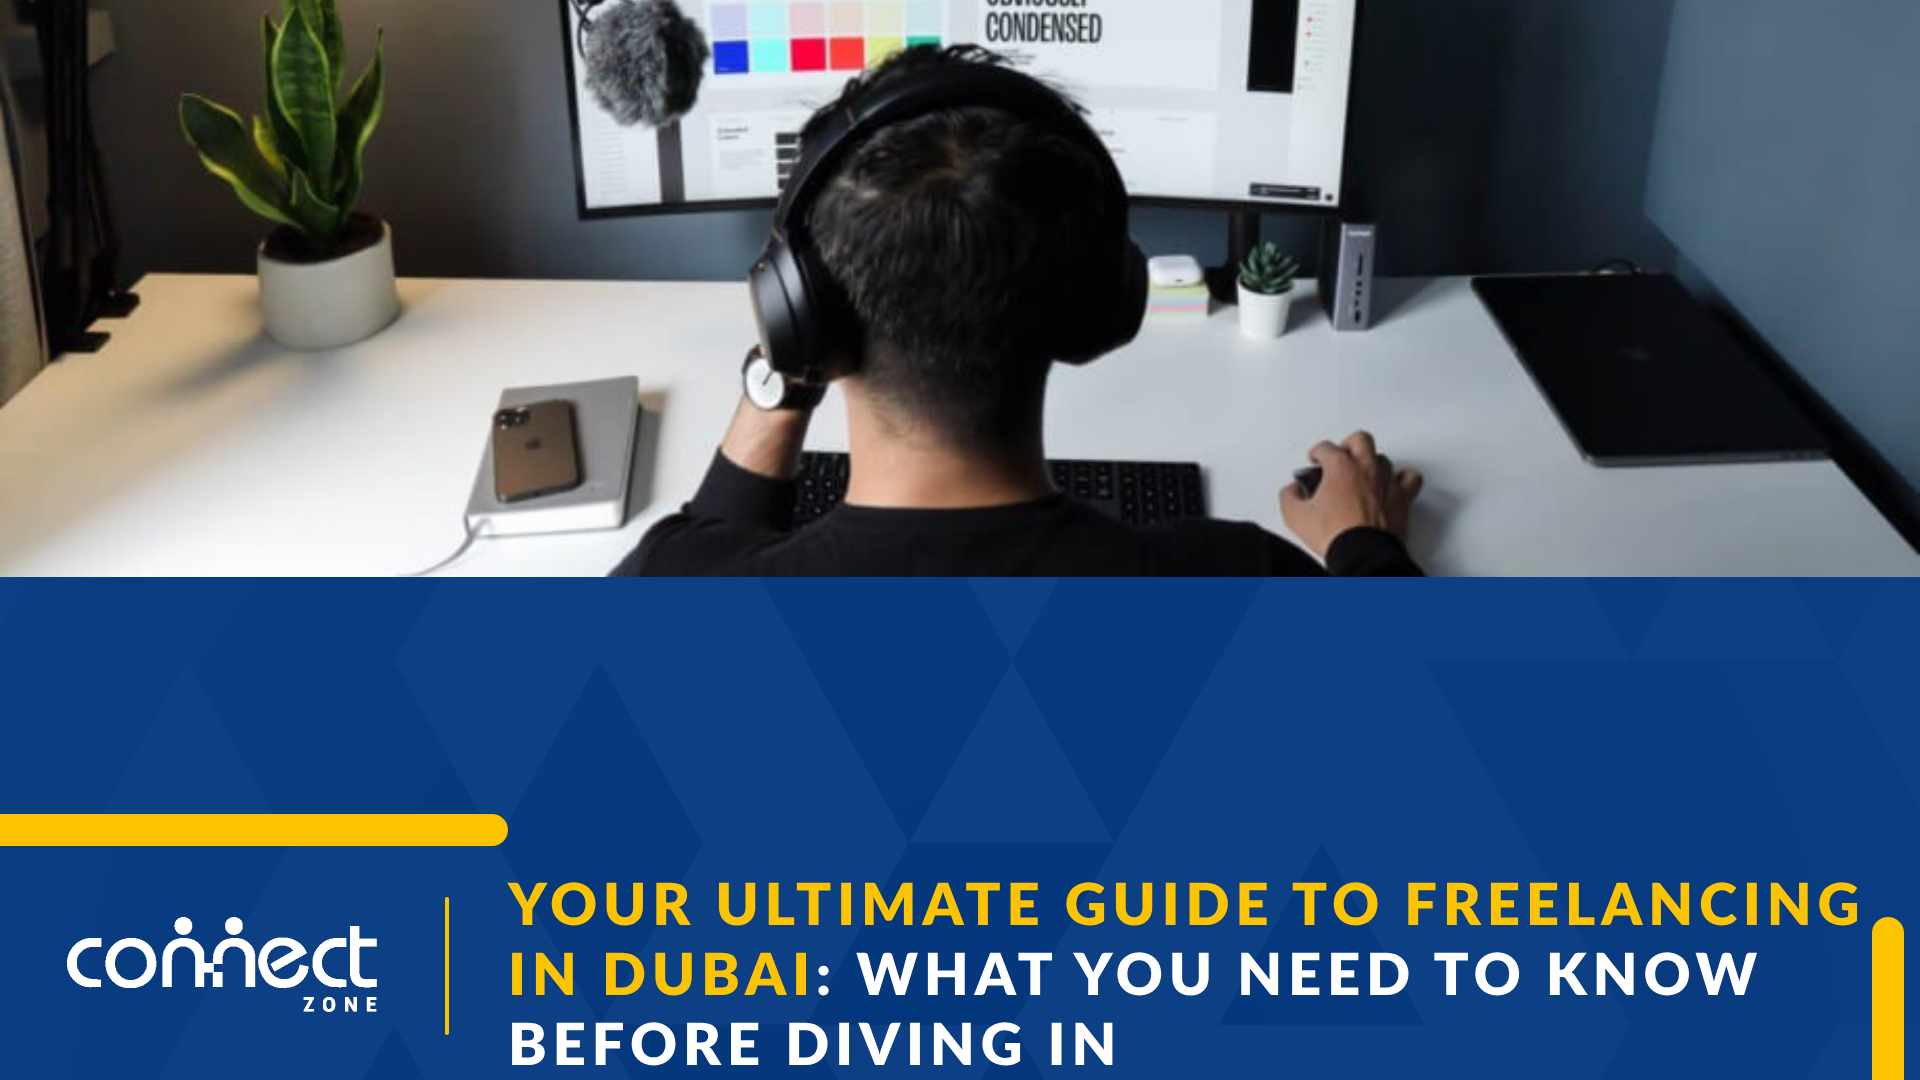 Your Ultimate Guide to Freelancing in Dubai What You Need to Know Before Diving In